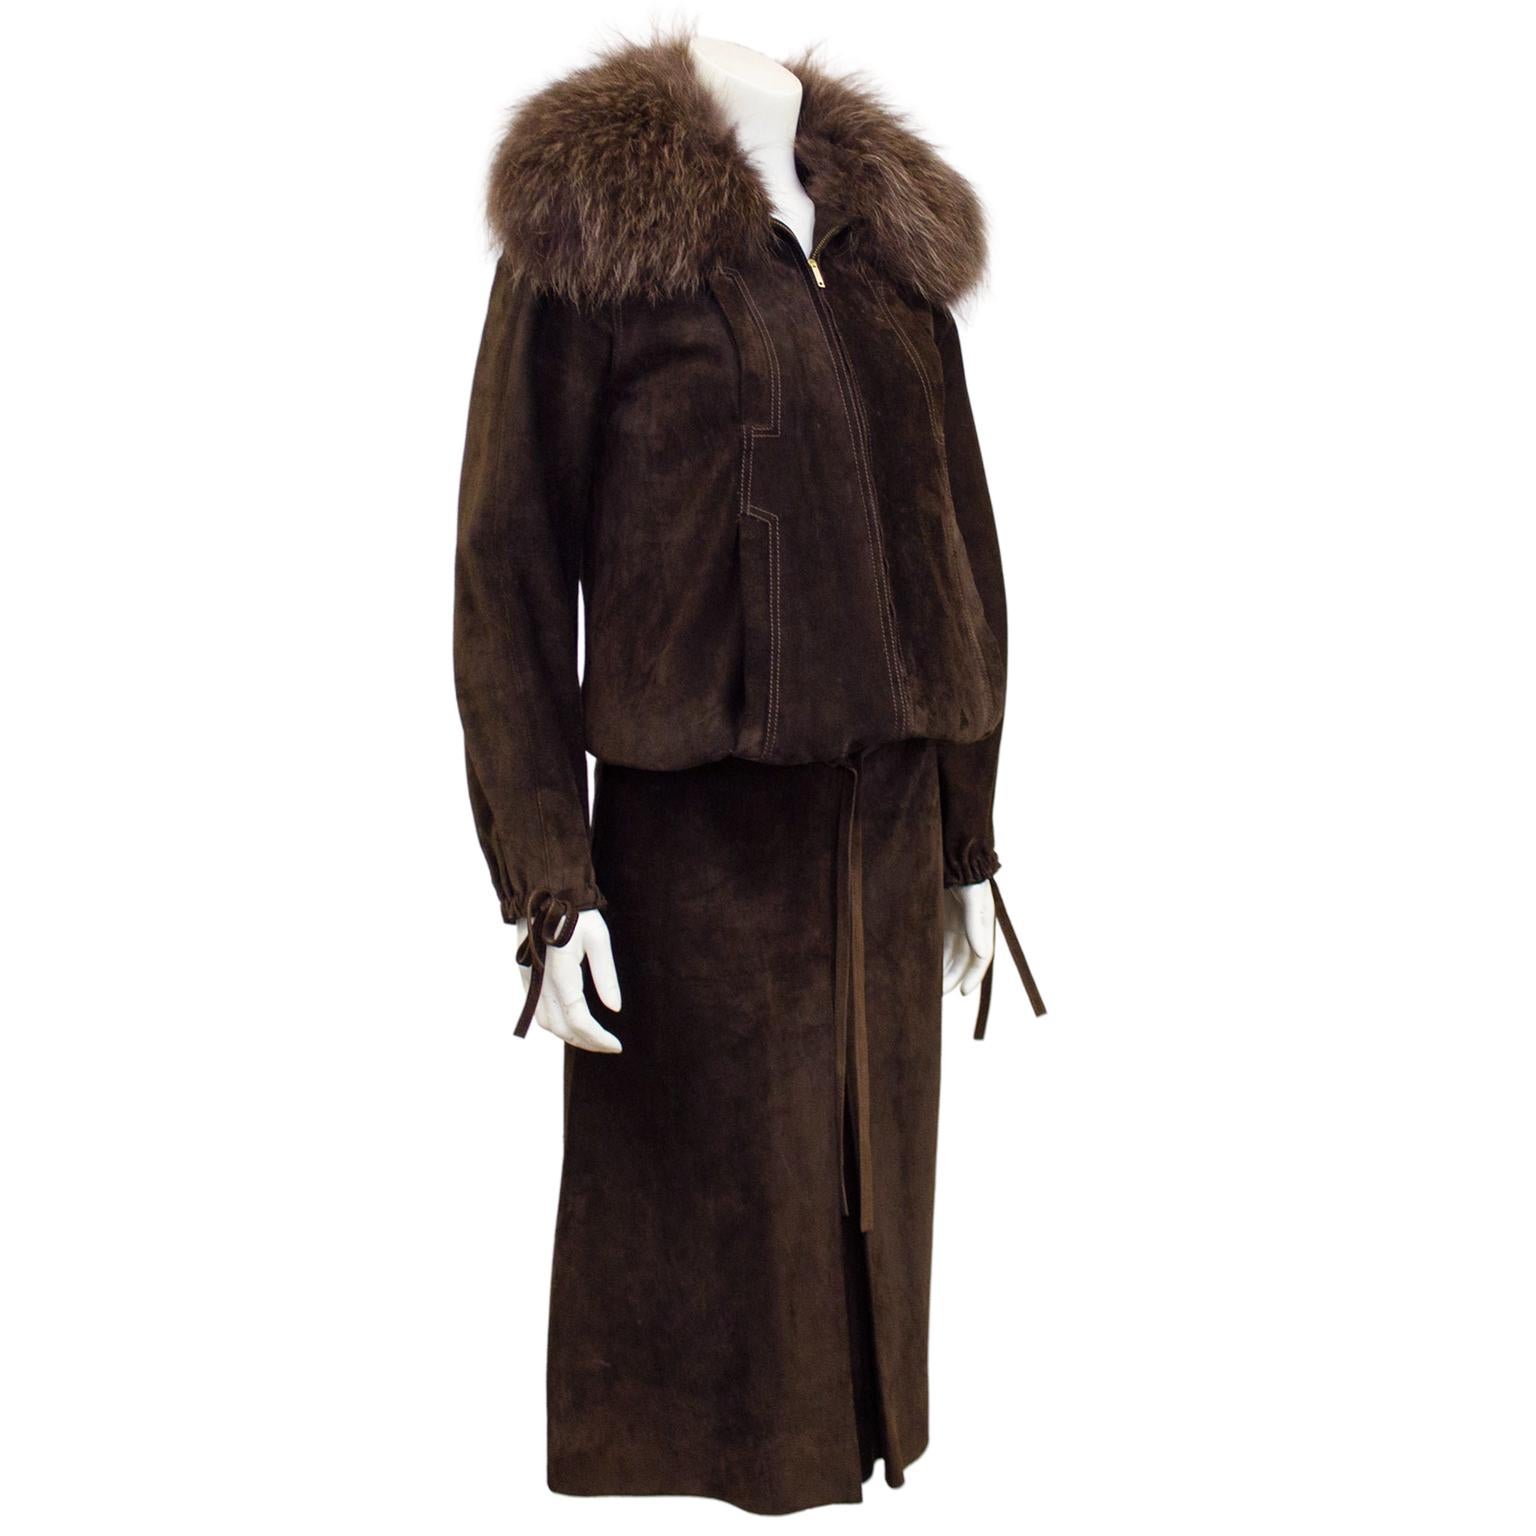 Stunning Loewe ensemble dating from the early 1980s. Brown suede oversized bomber jacket with tonal top stitching details and zipper front. Elastic cuffs and waist with ties. Four vertical slit pockets at waist and bust. Oversized brown fox collar.